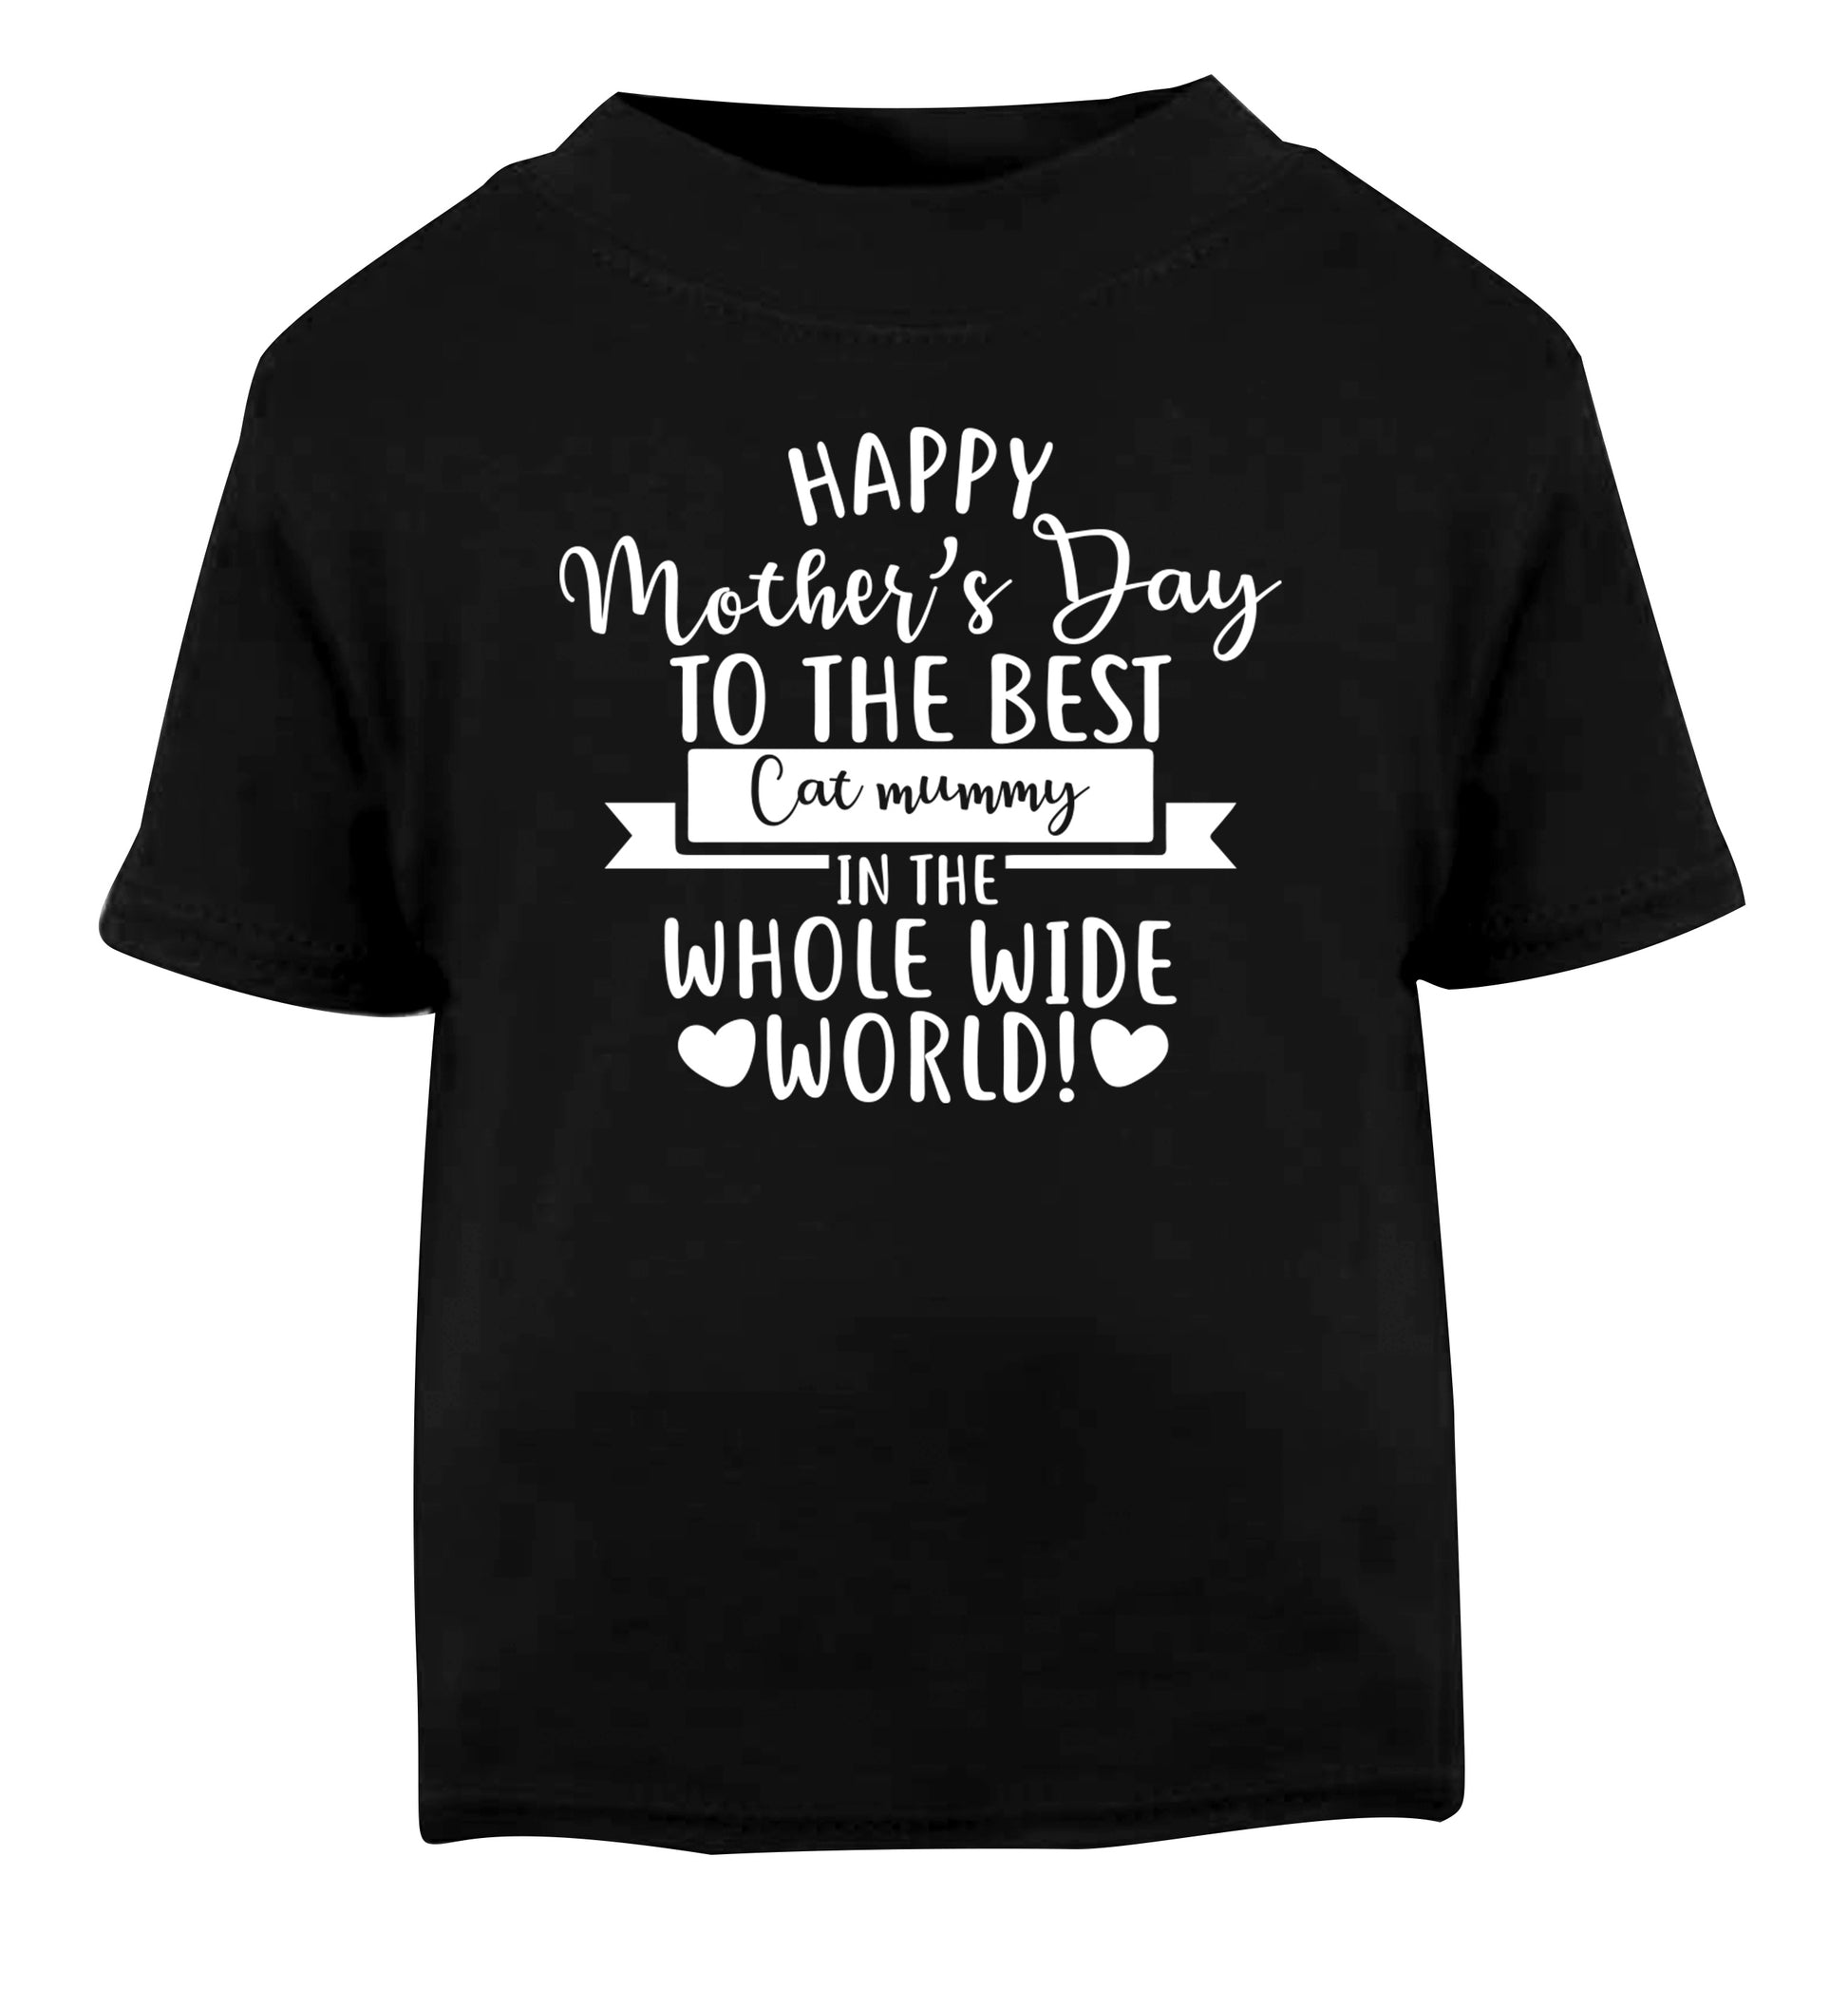 Happy mother's day to the best cat mummy in the world Black Baby Toddler Tshirt 2 years